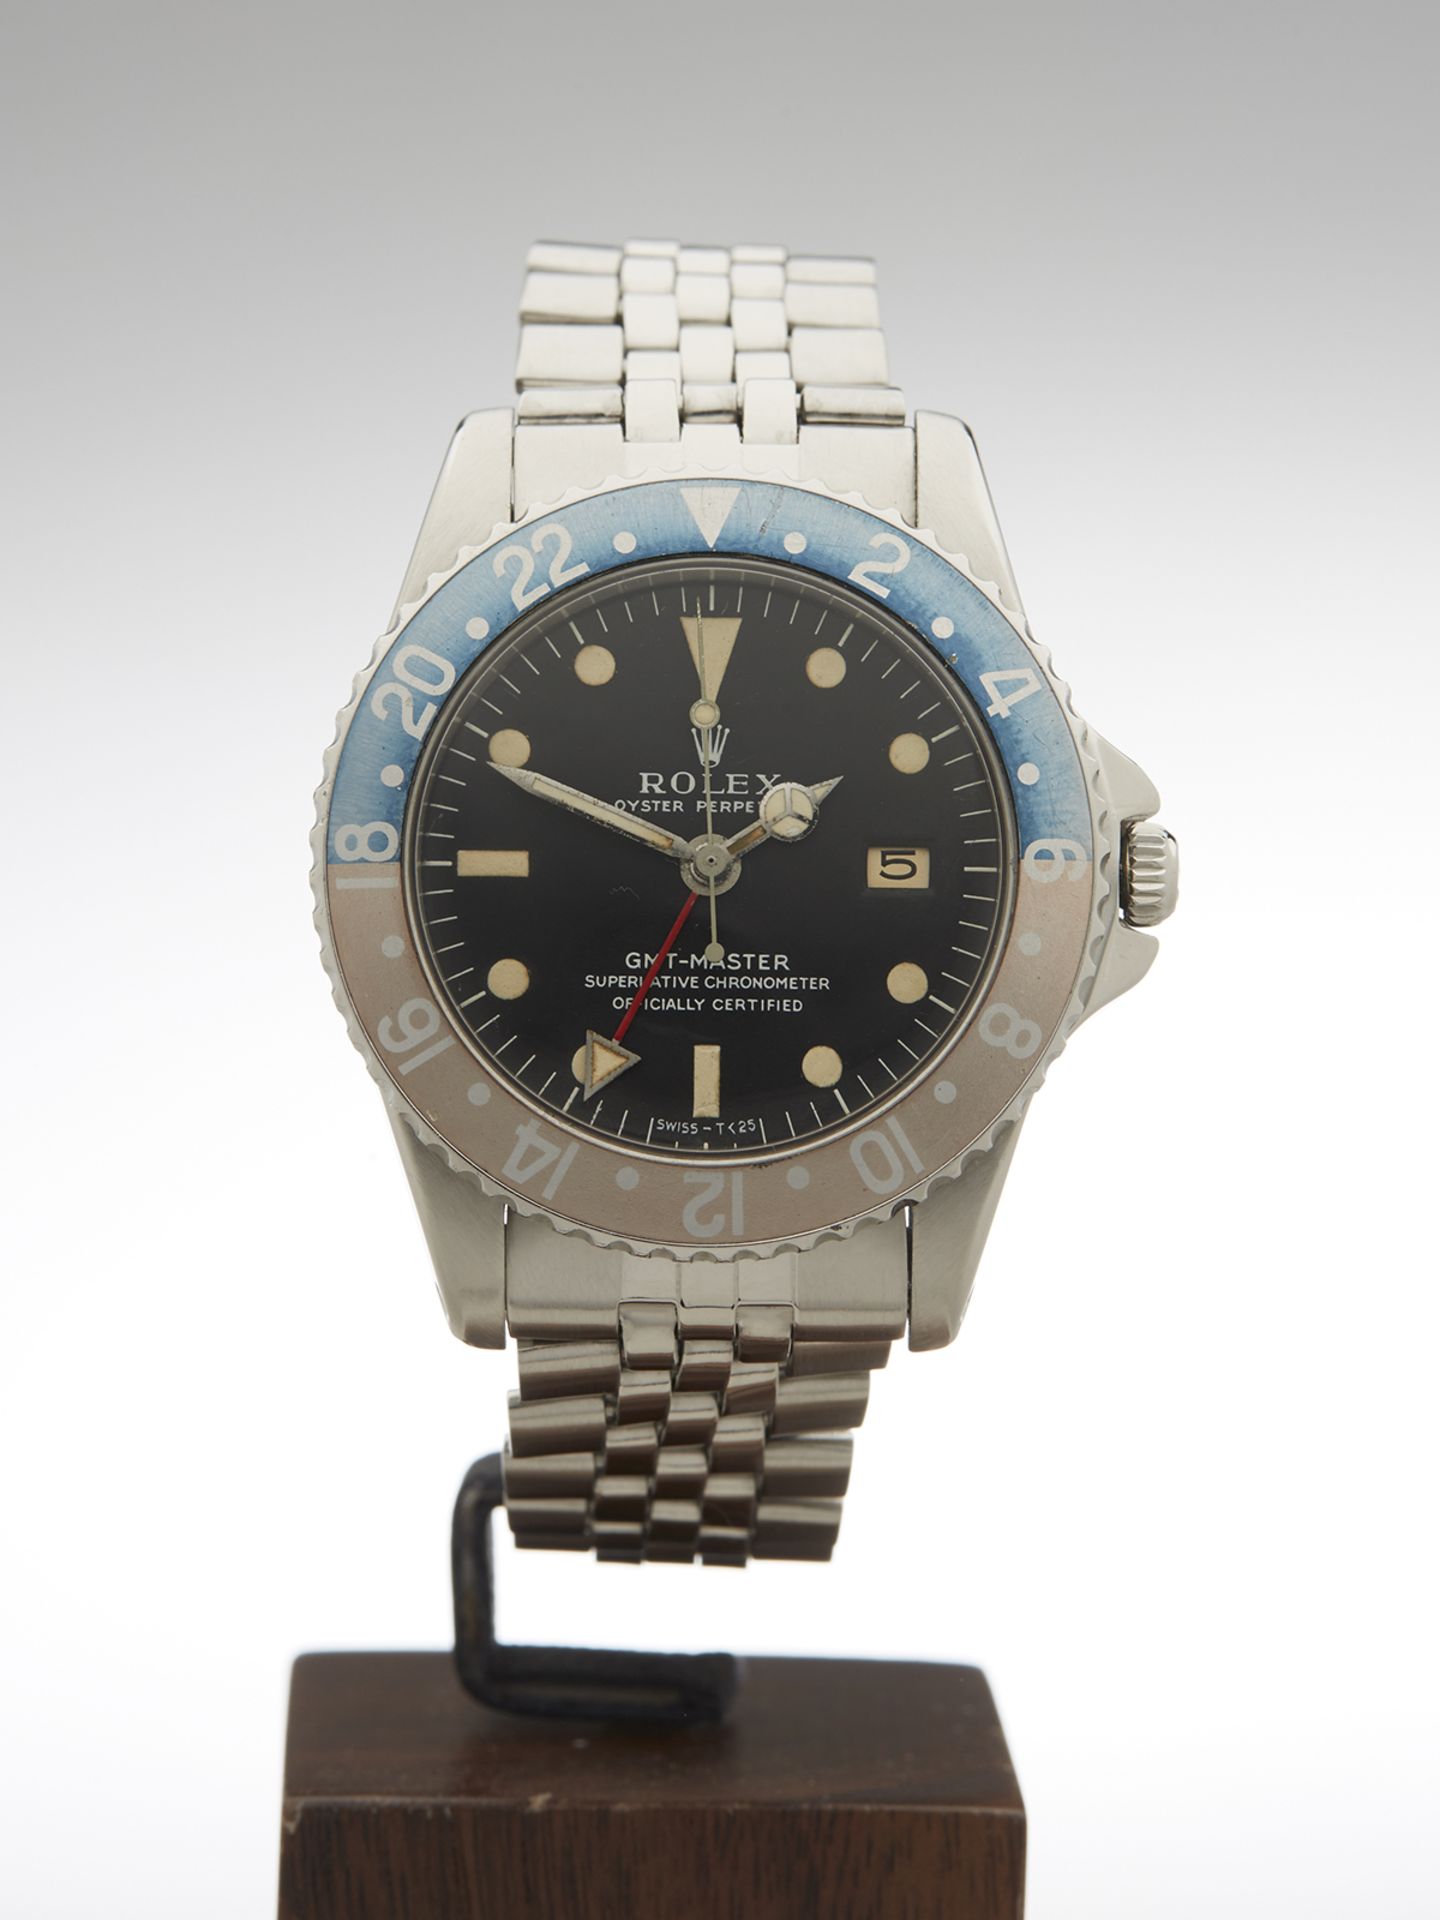 Rare, 1961 Rolex, GMT-Master Pointed Crown Guards, Matt Dial 40mm Stainless Steel 1675 - Image 3 of 9